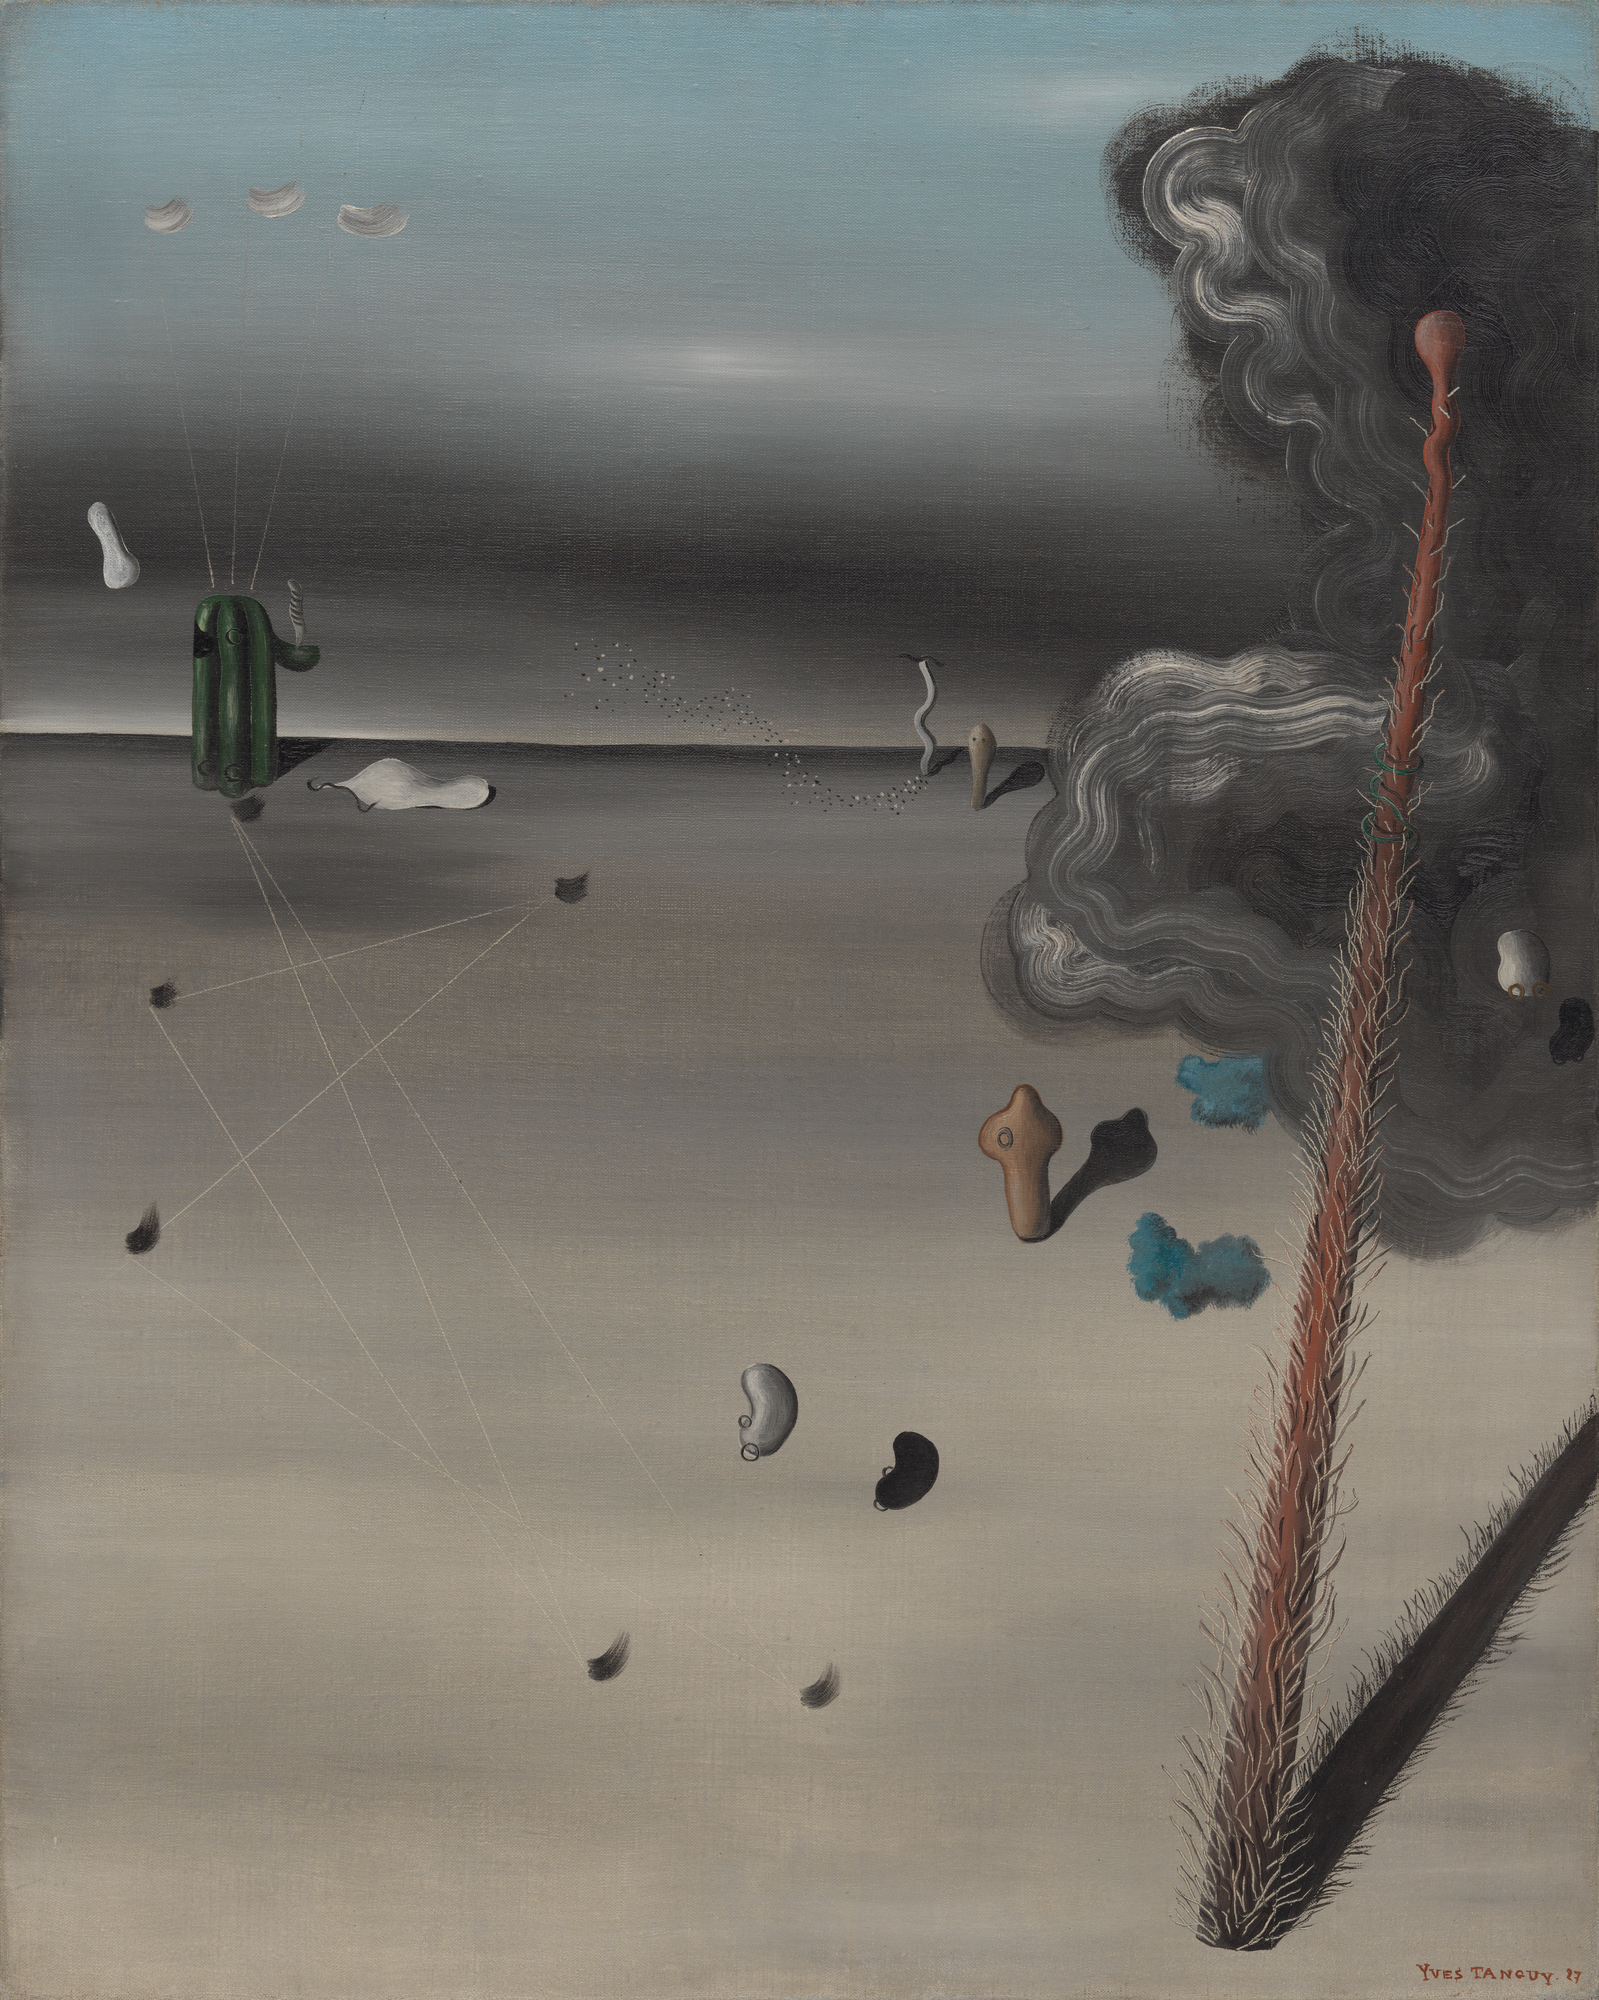 Yves Tanguy, Mama, Papa is Wounded! 1927, oil on canvas, 36 ¼ x 28 ¾ inches (MoMA)